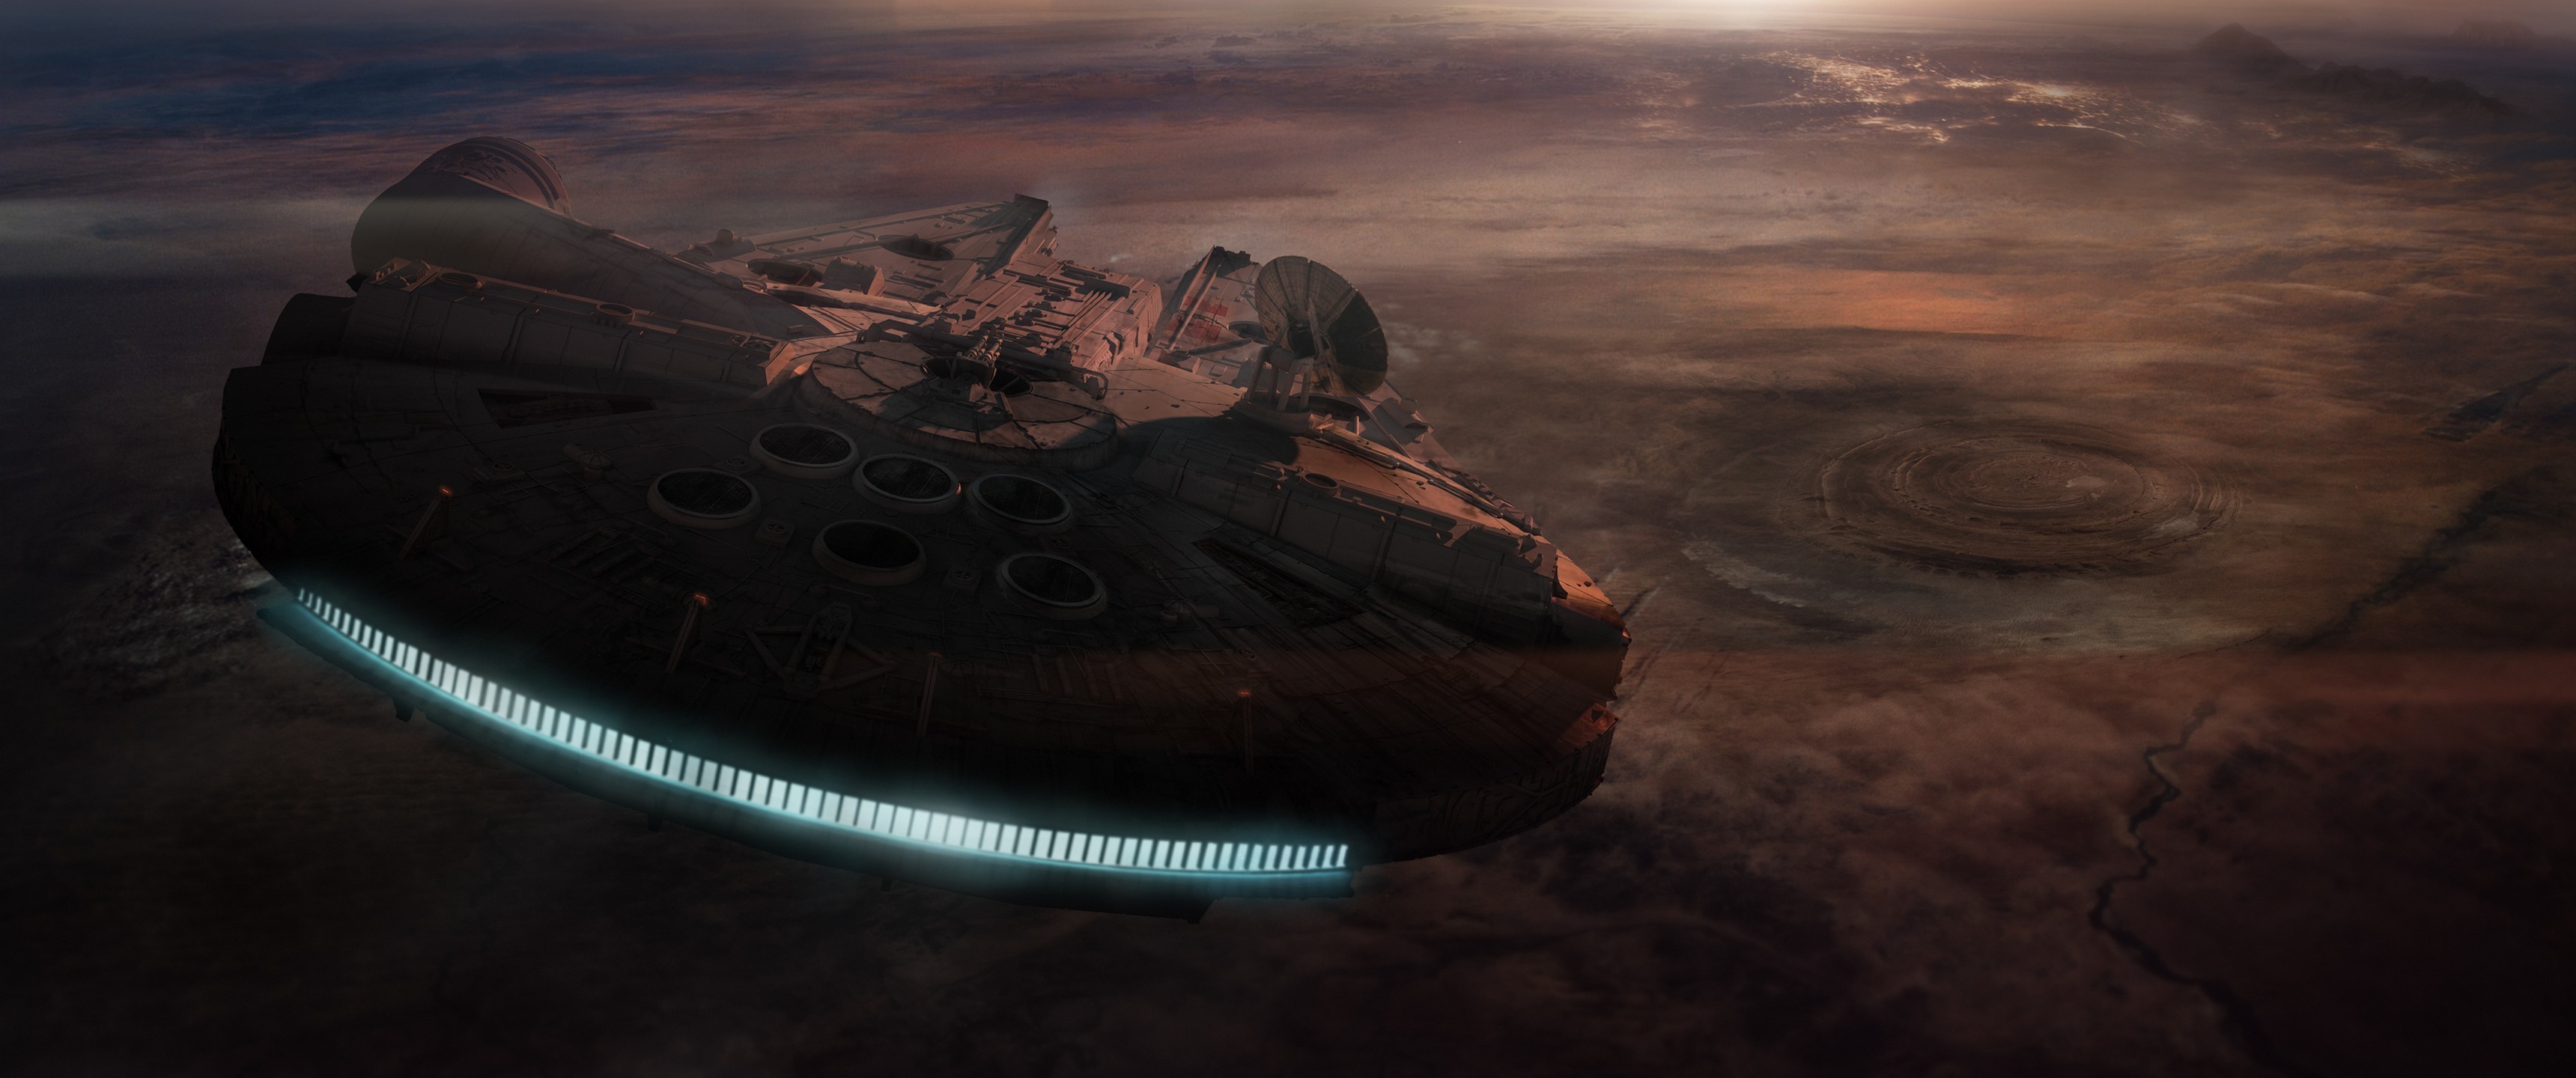 Star Wars, Millennium Falcon Wallpapers HD / Desktop and Mobile Backgrounds